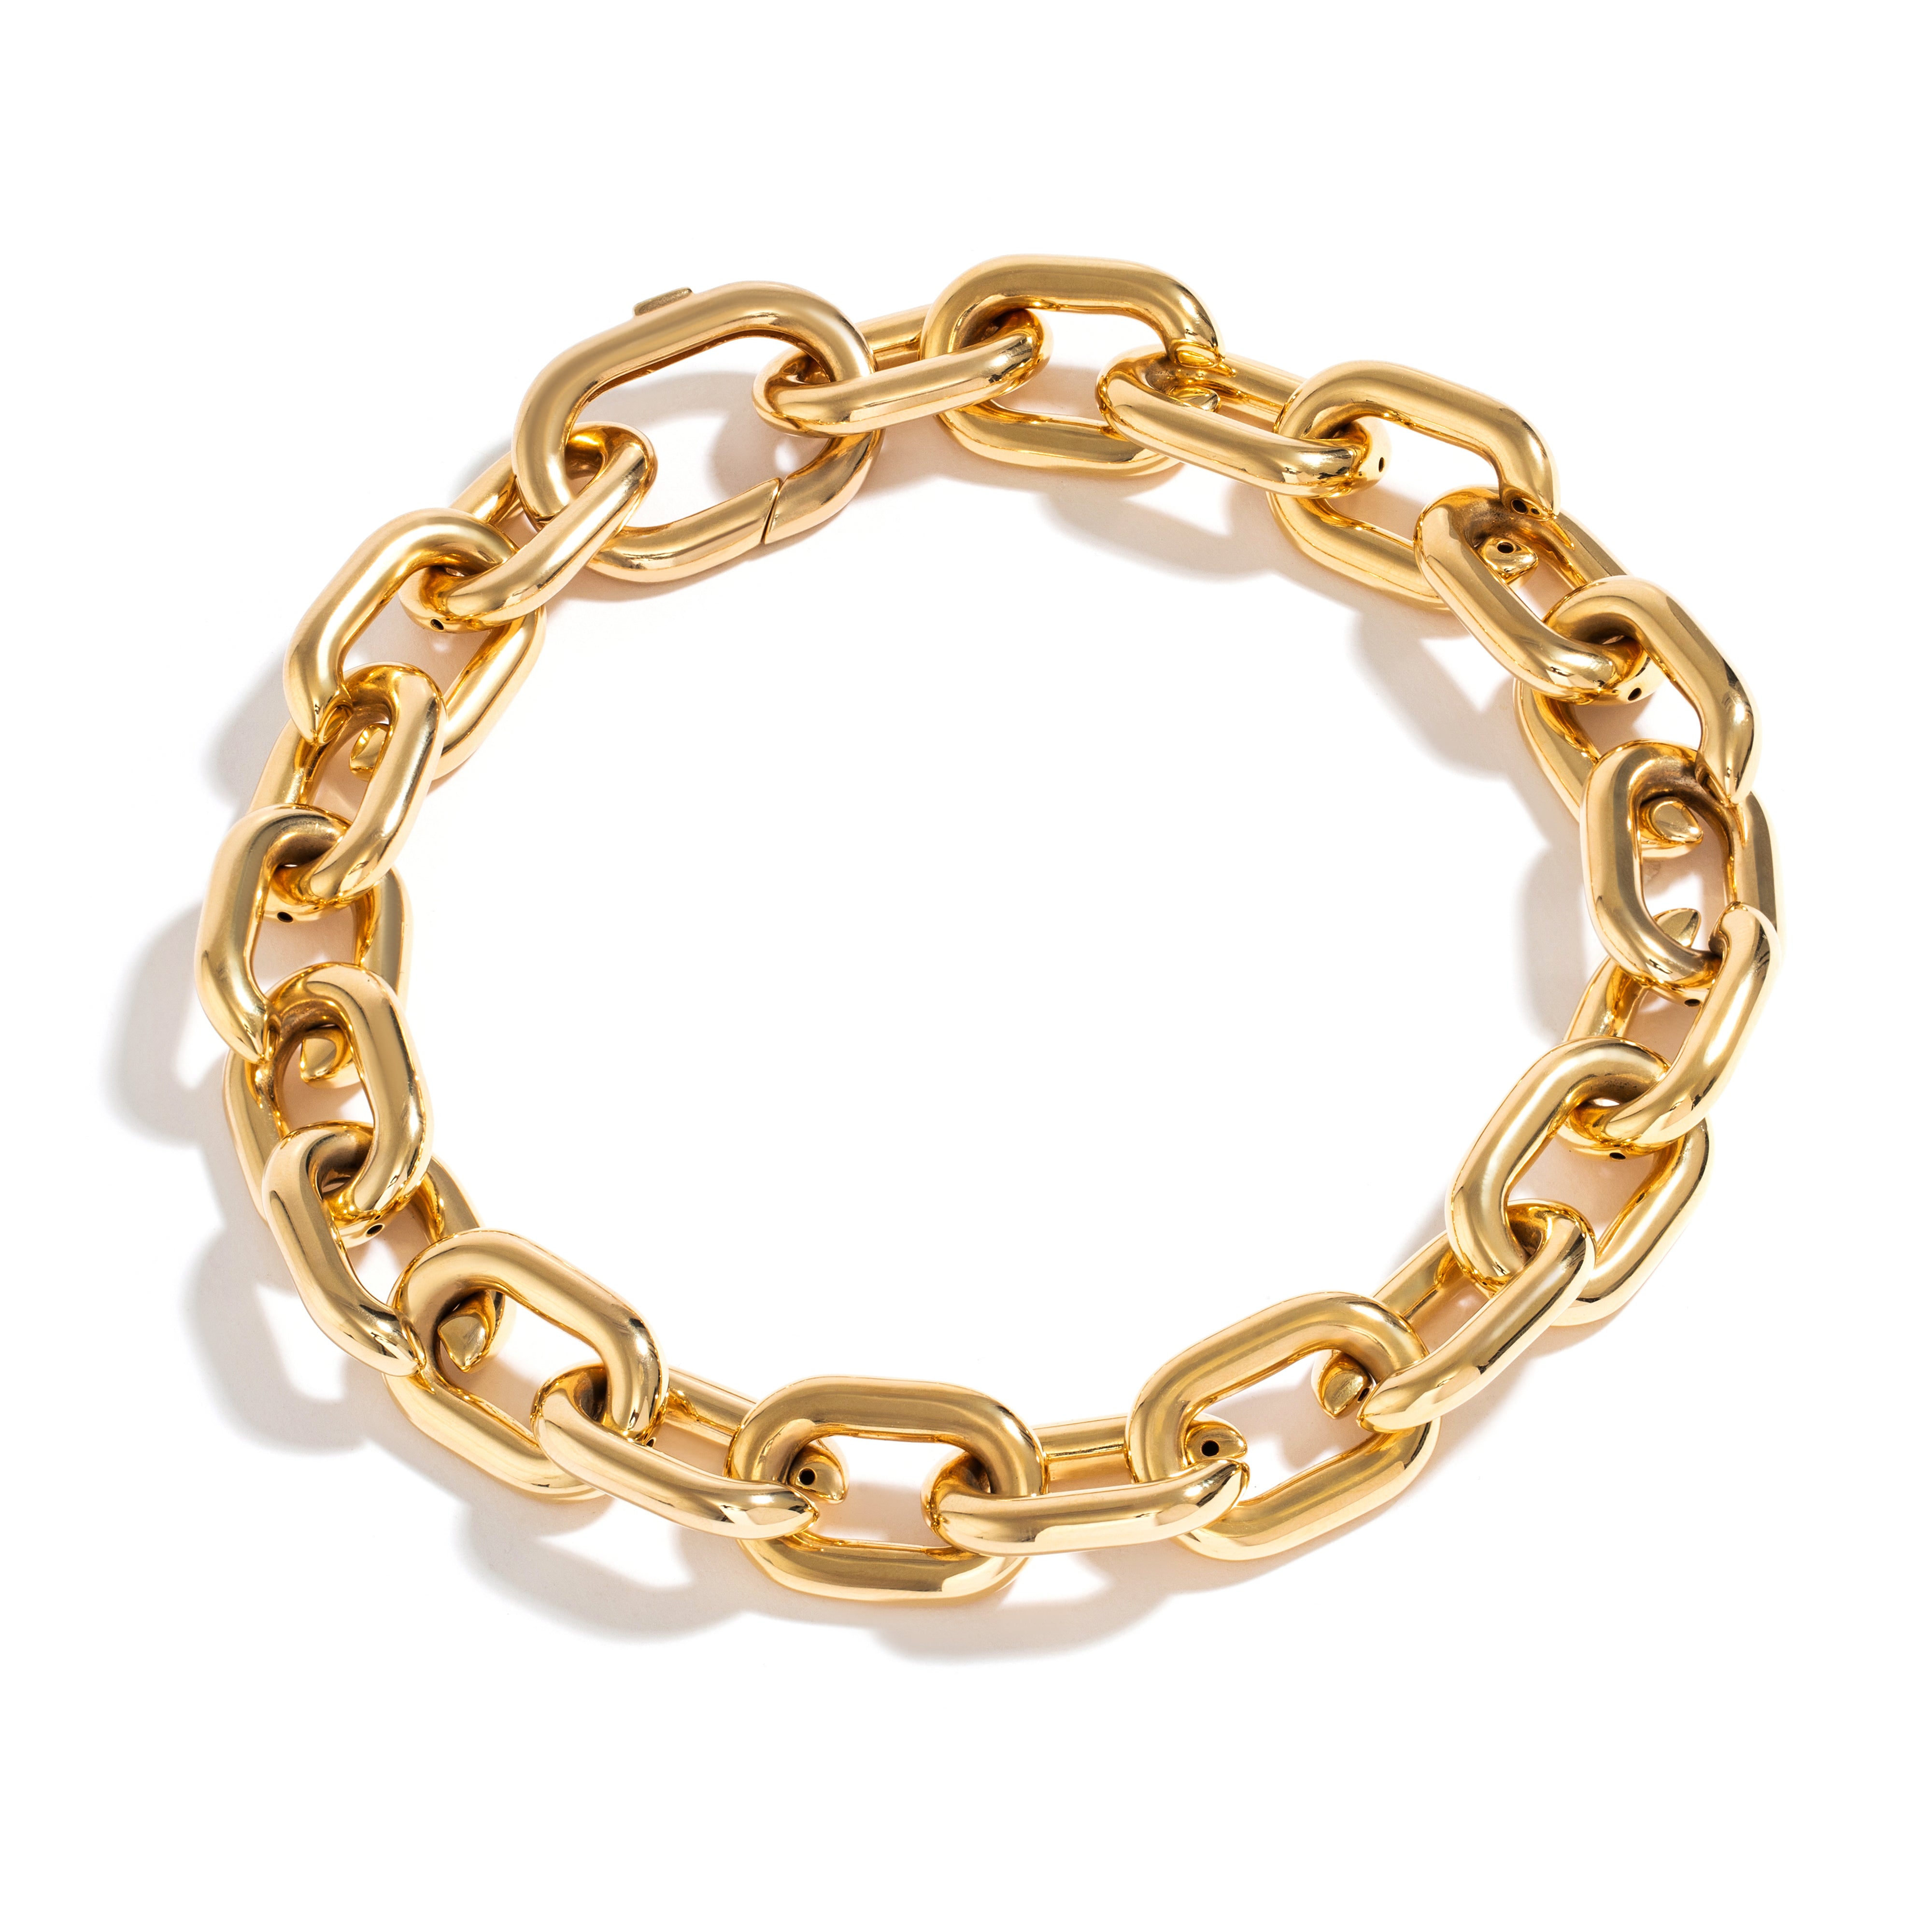 LARGE CHAIN NECKLACE IN 18K YELLOW GOLD PLATED SILVER